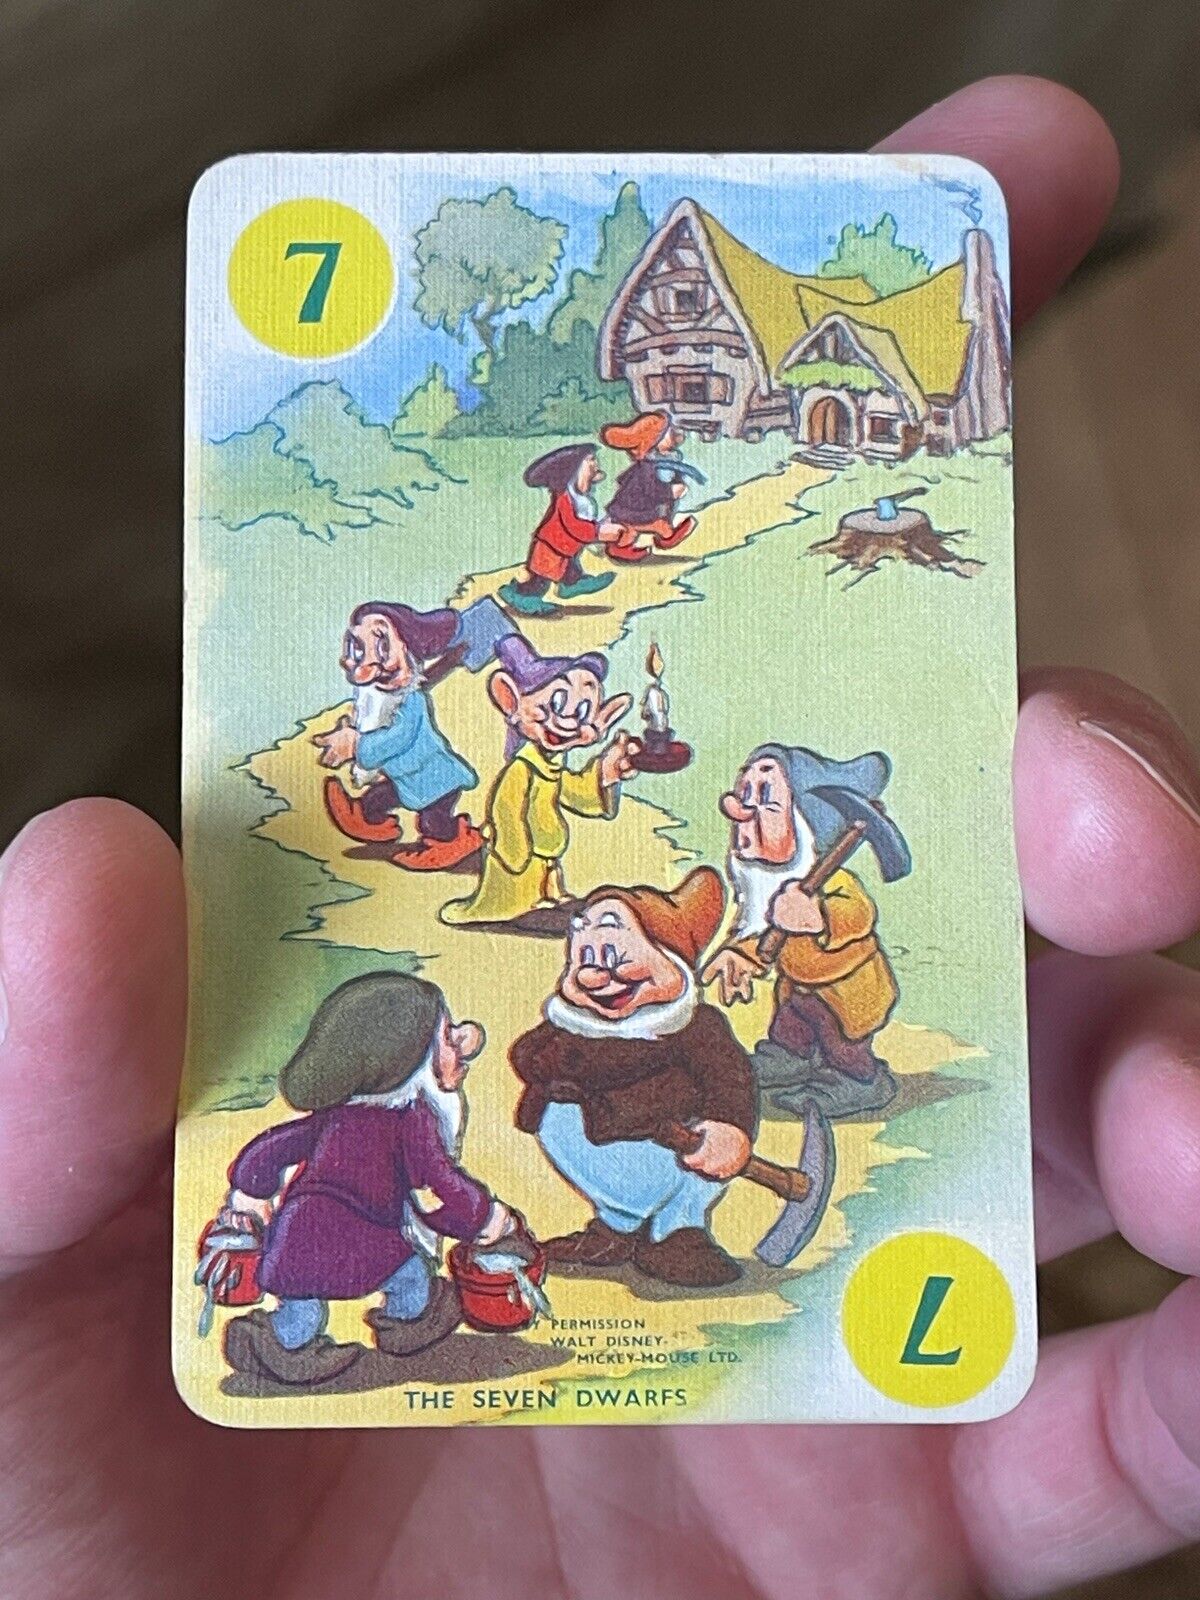 EXTREMELY RARE 1937 SNOW WHITE SEVEN DWARFS 1ST EDITION CARD GAME CASTELL PEPYS